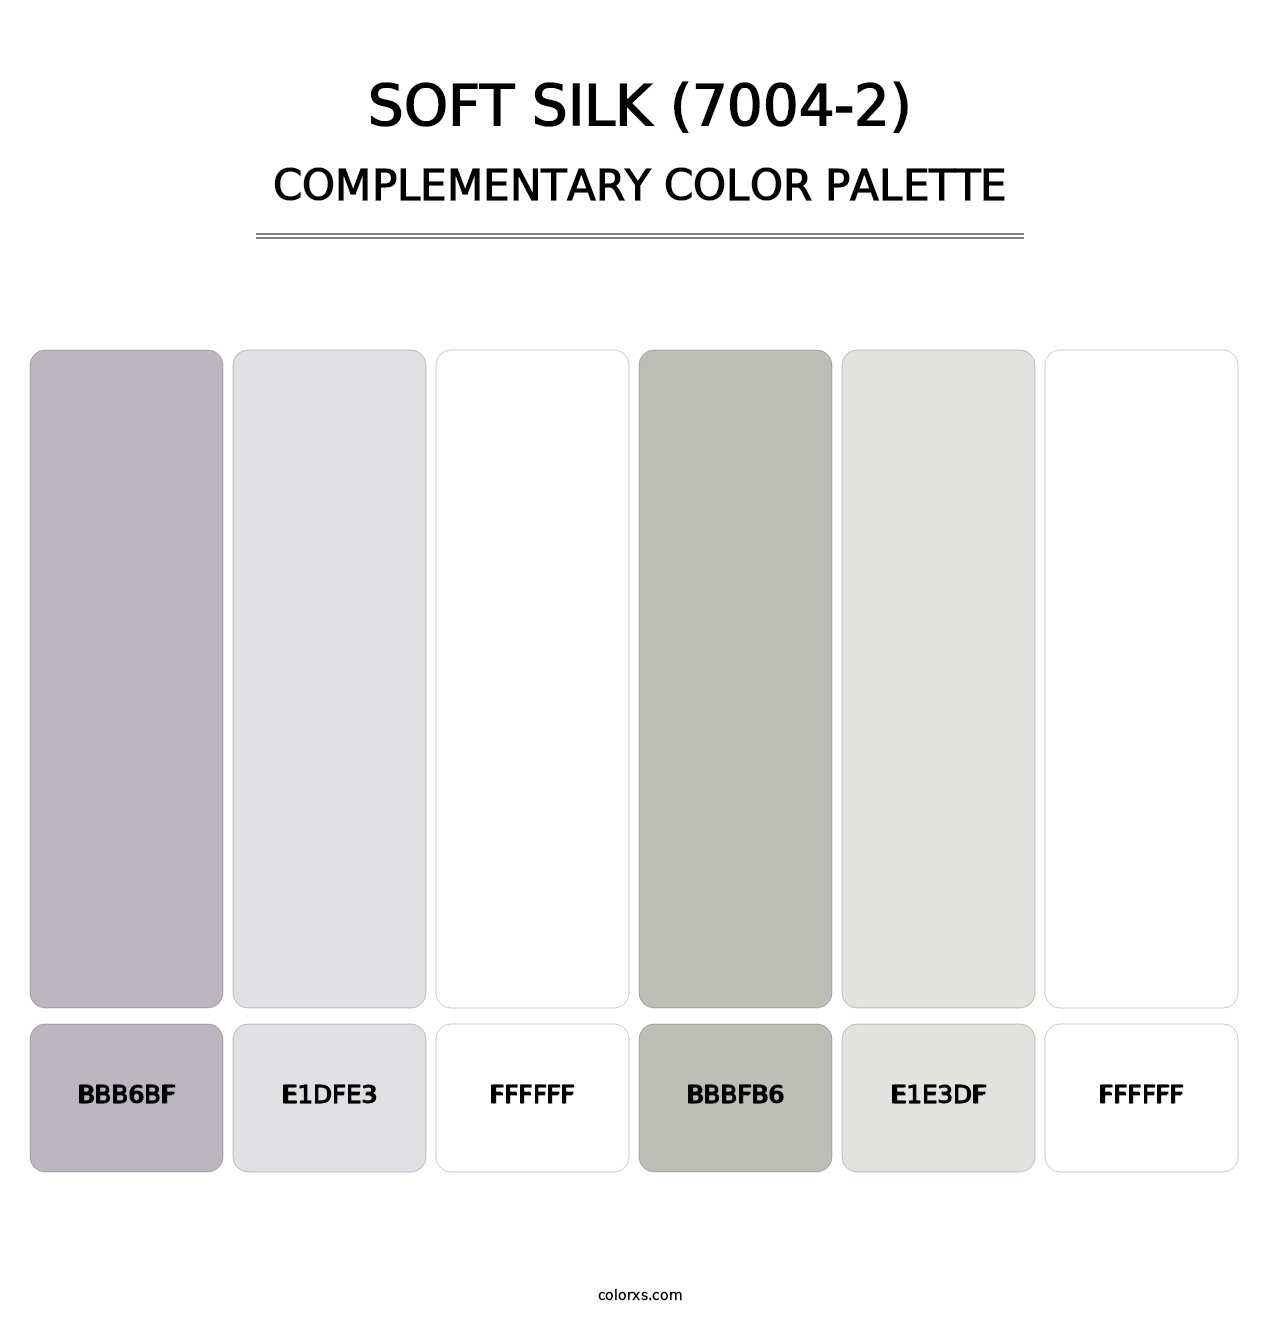 Soft Silk (7004-2) - Complementary Color Palette